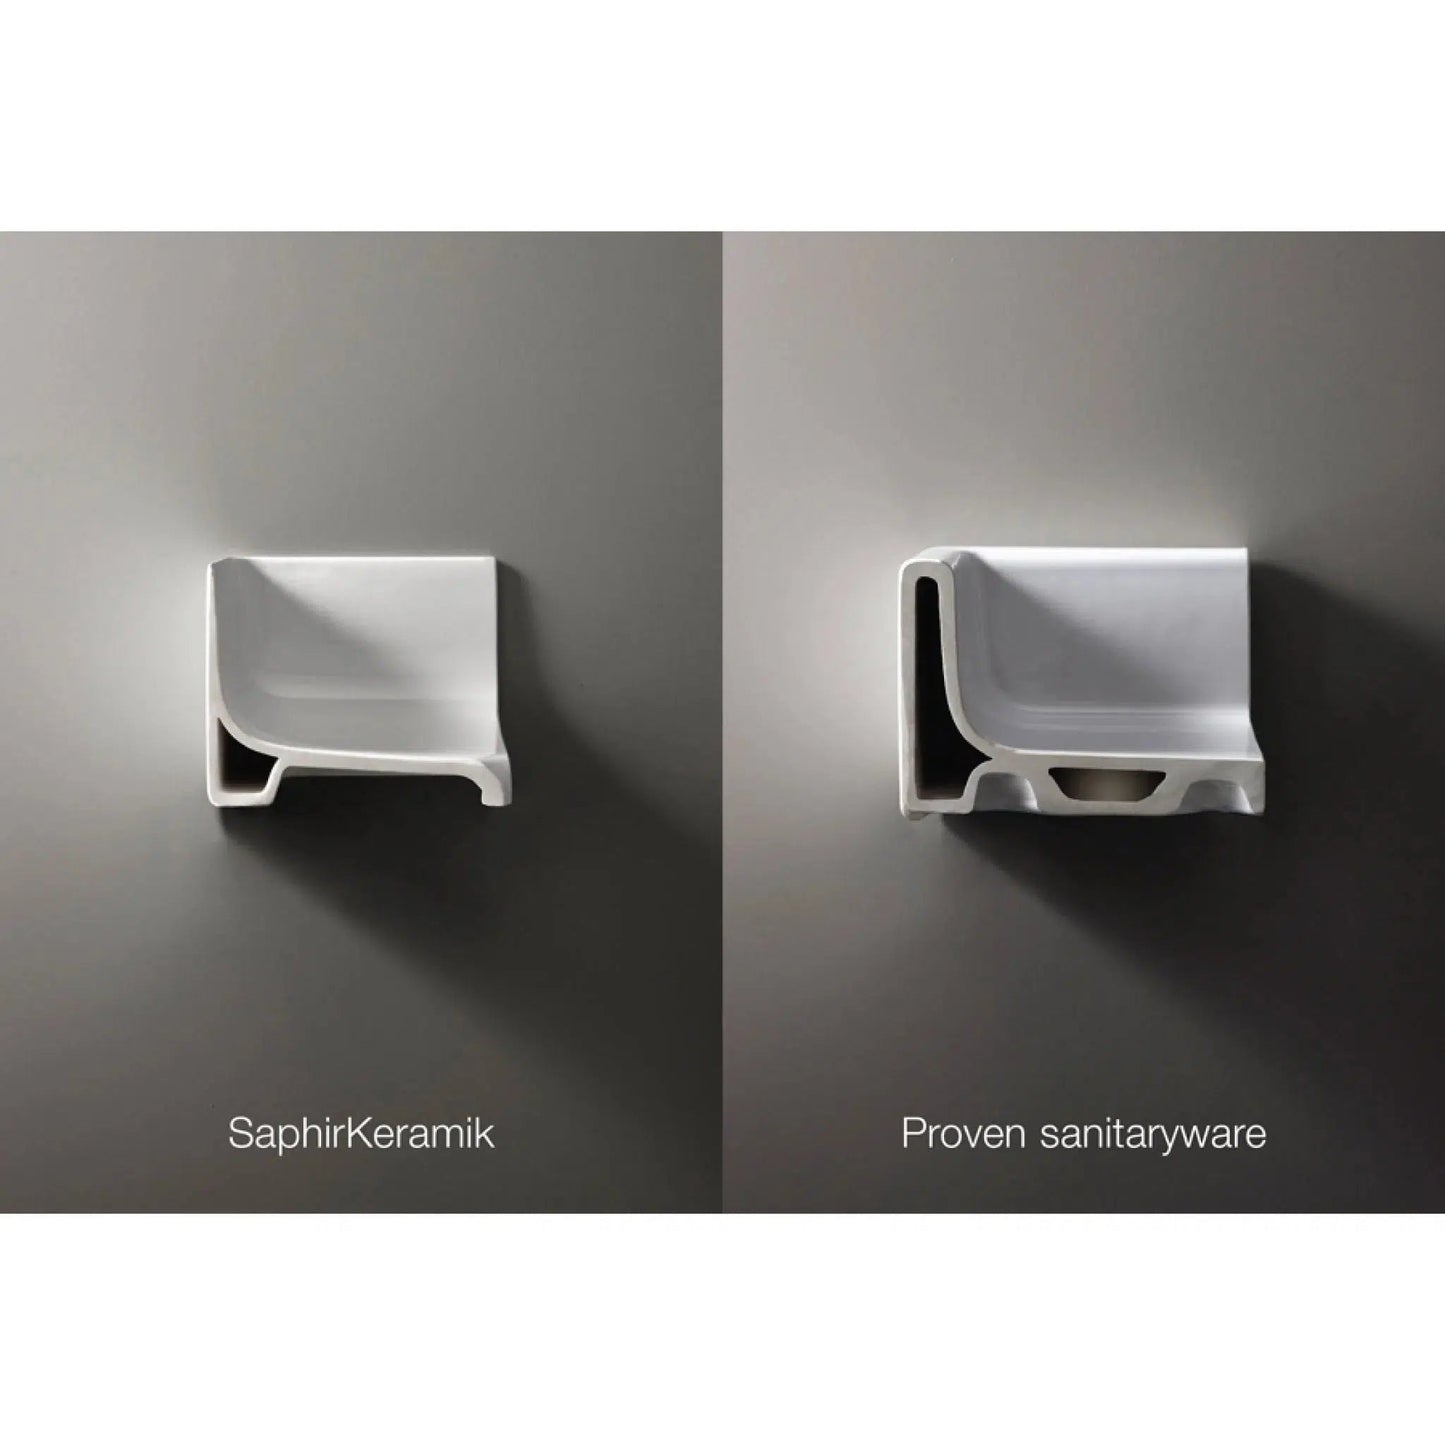 Laufen Sonar 24" White Ceramic Wall-Mounted Bathroom Sink Without Faucet Hole